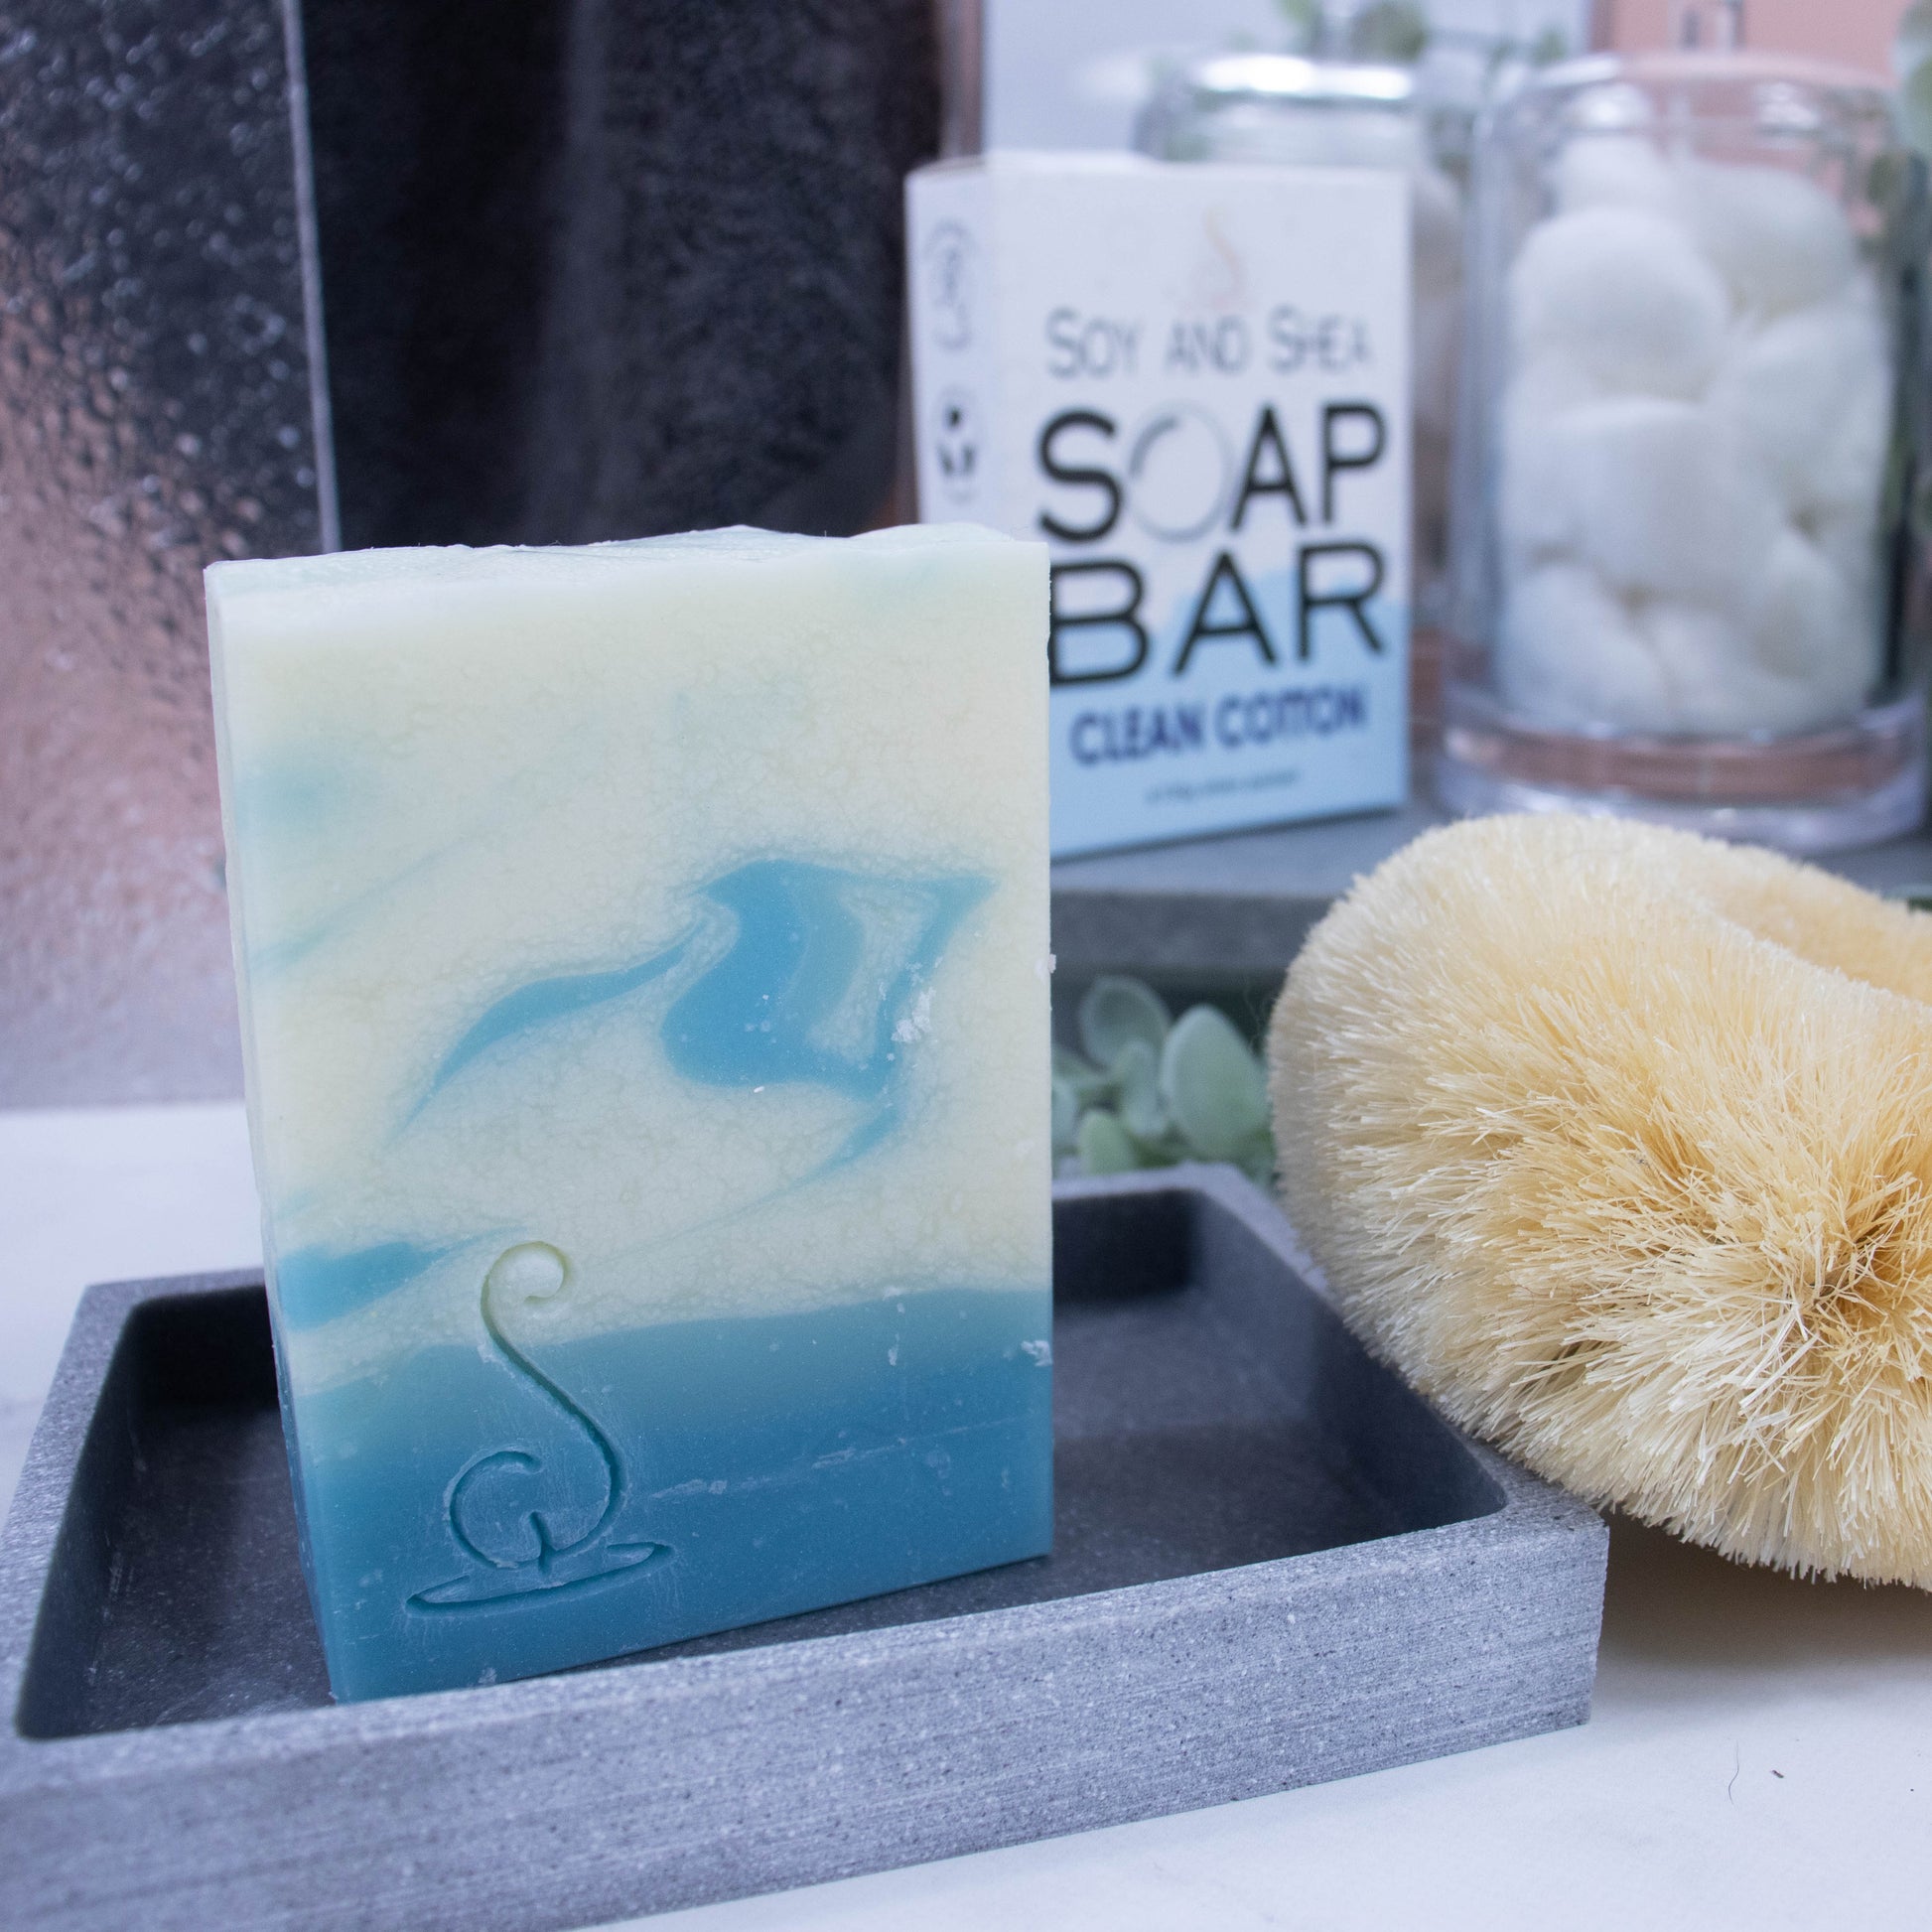 A close up look of the soap which has layers of colour including two shades of pale blue at the base and the top layer being white with whisps of the blues swirled through. The soap is rectangular in shape and is taller than wide. It is sitting on a stone soap dish and behind it is the box the soap came in. The lower portion of the box has a bubble border coloured in pale blue whereas the top is white with small grey bubbles. The box advises it is soap and the scent.